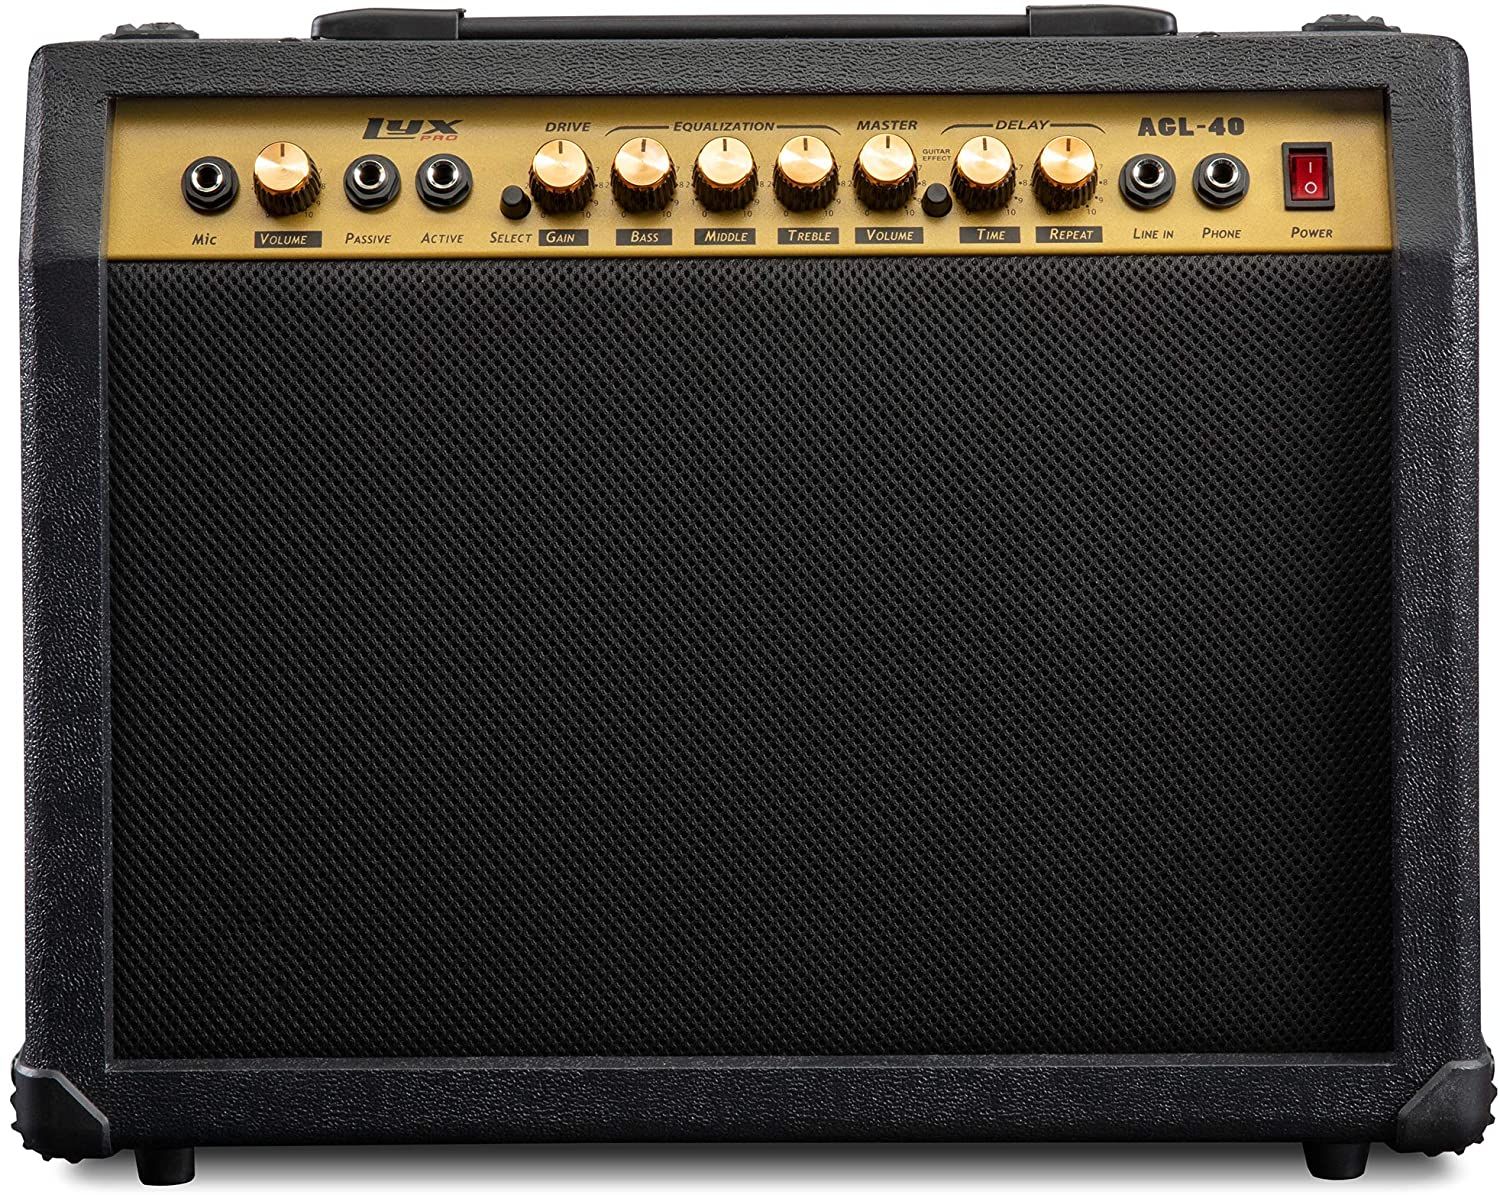 LyxPro guitar amp for practice